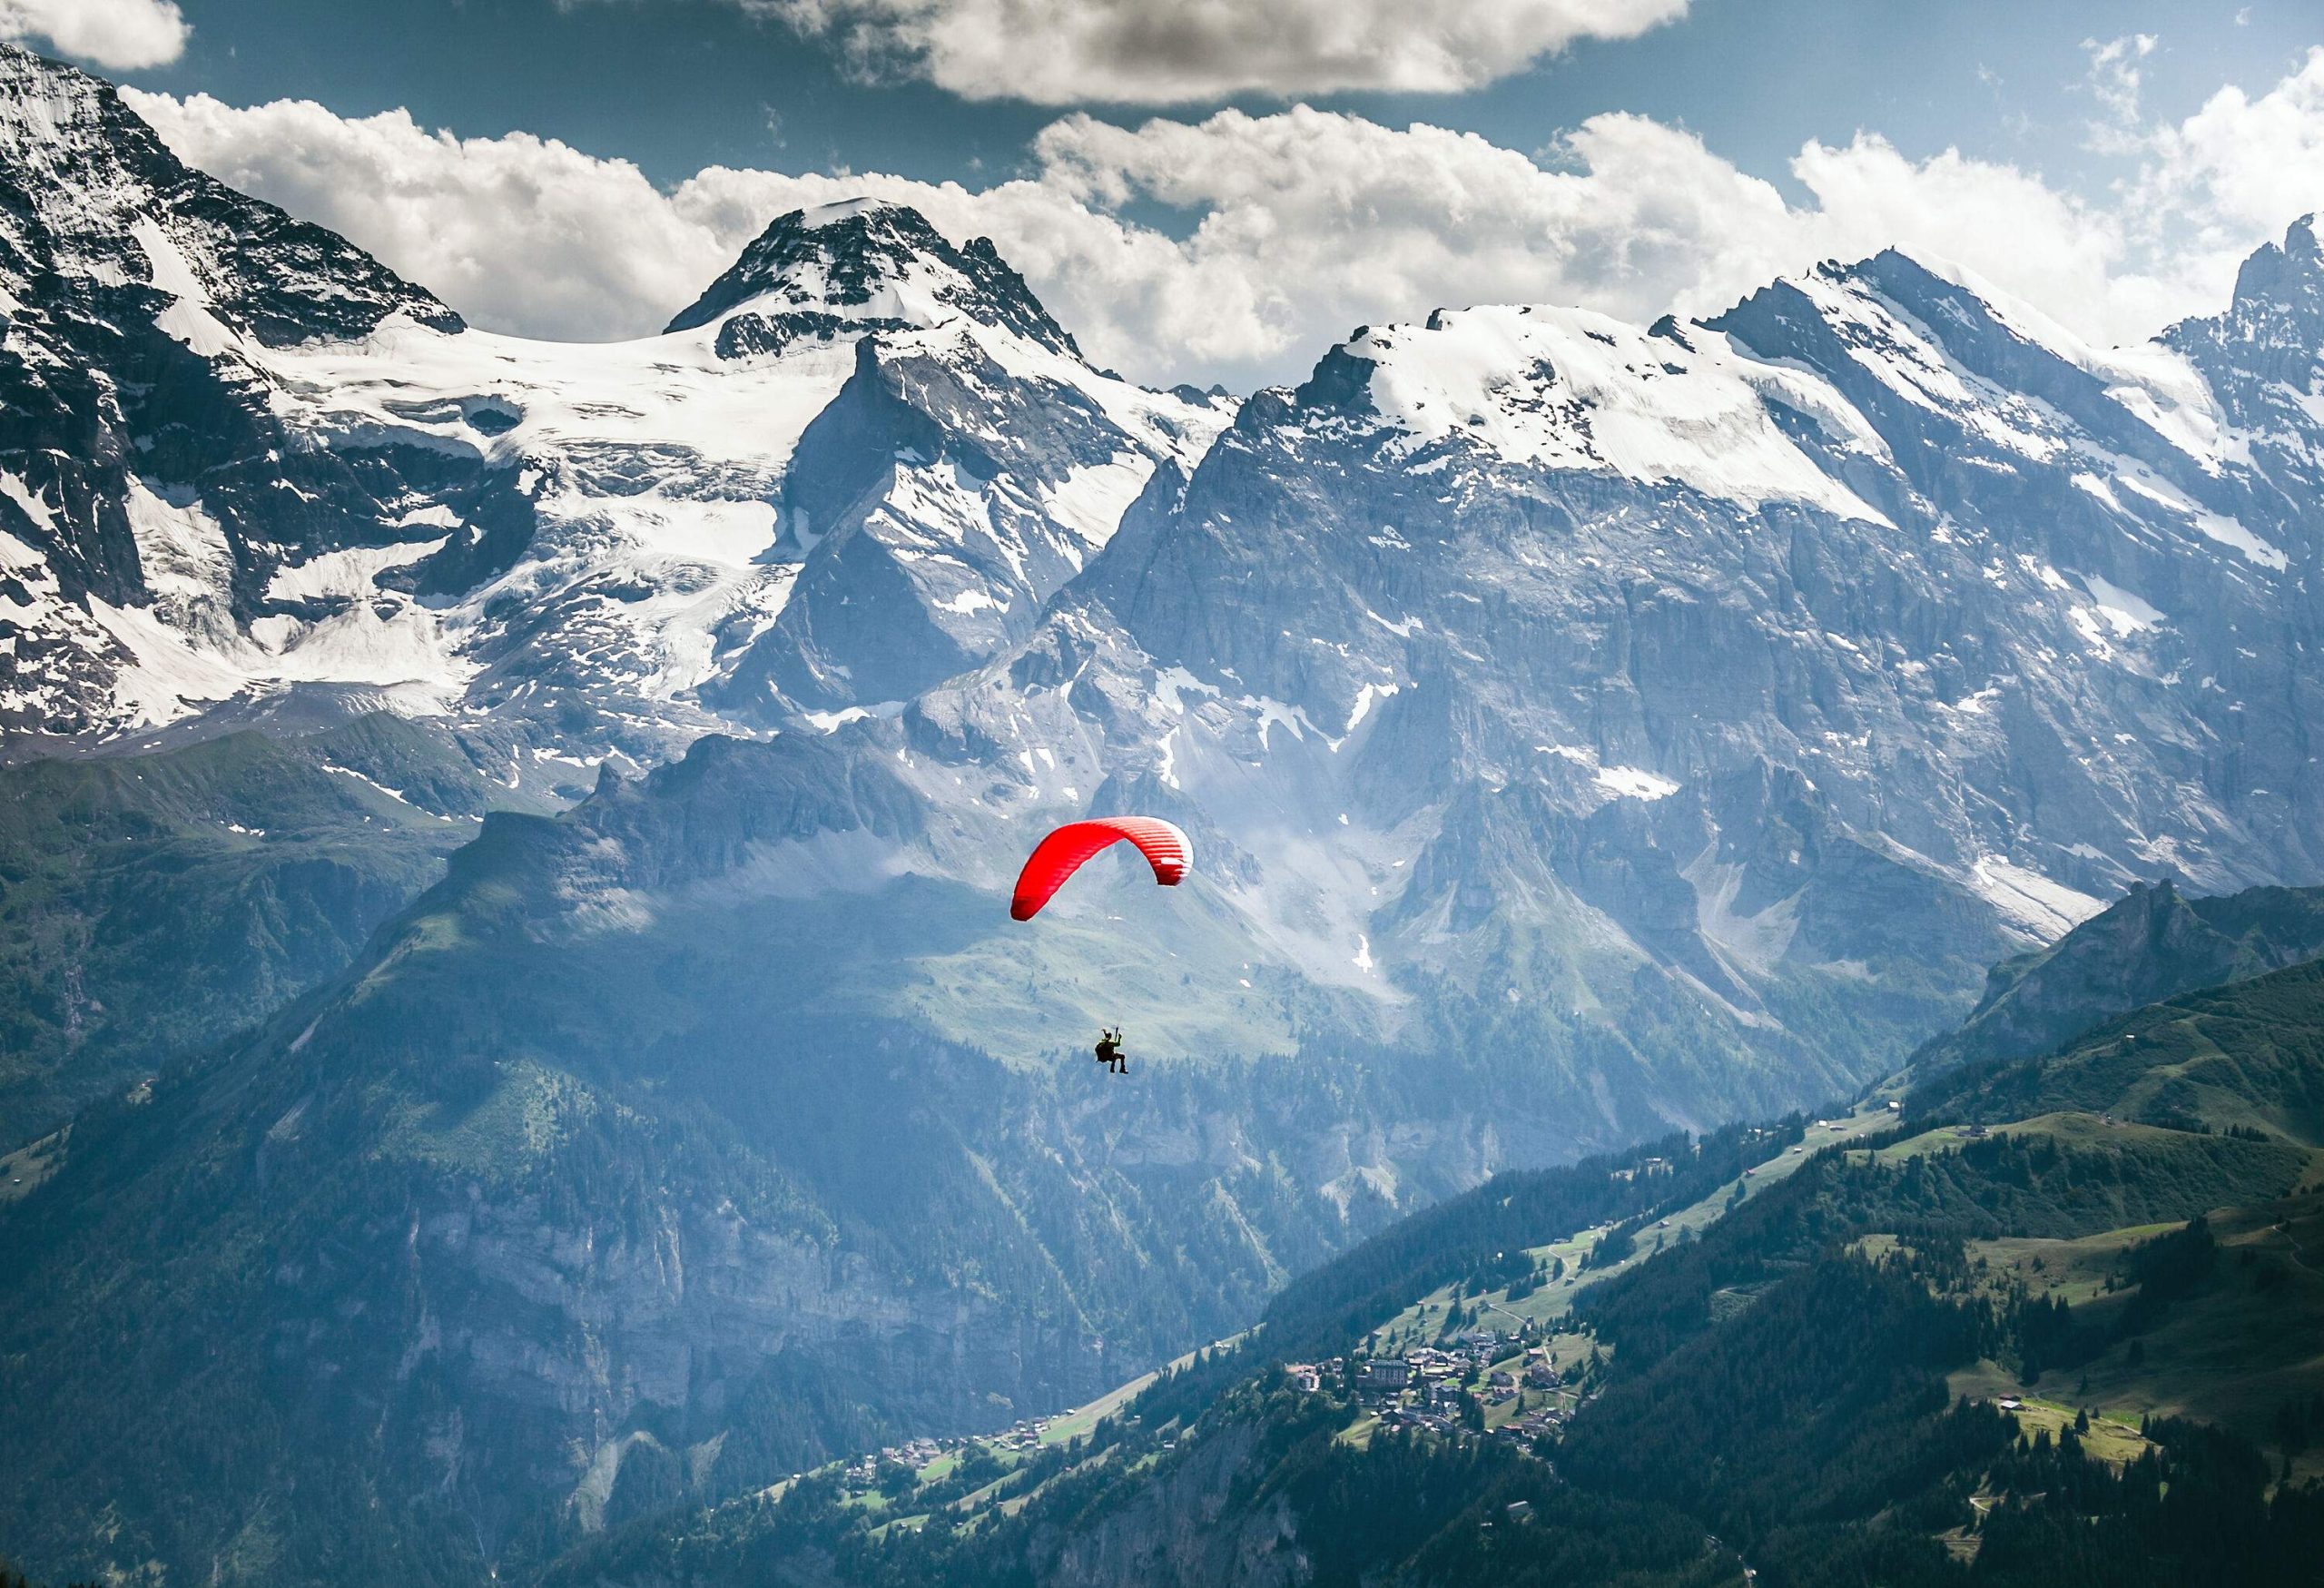 A person paragliding over the rugged snow-capped mountains.